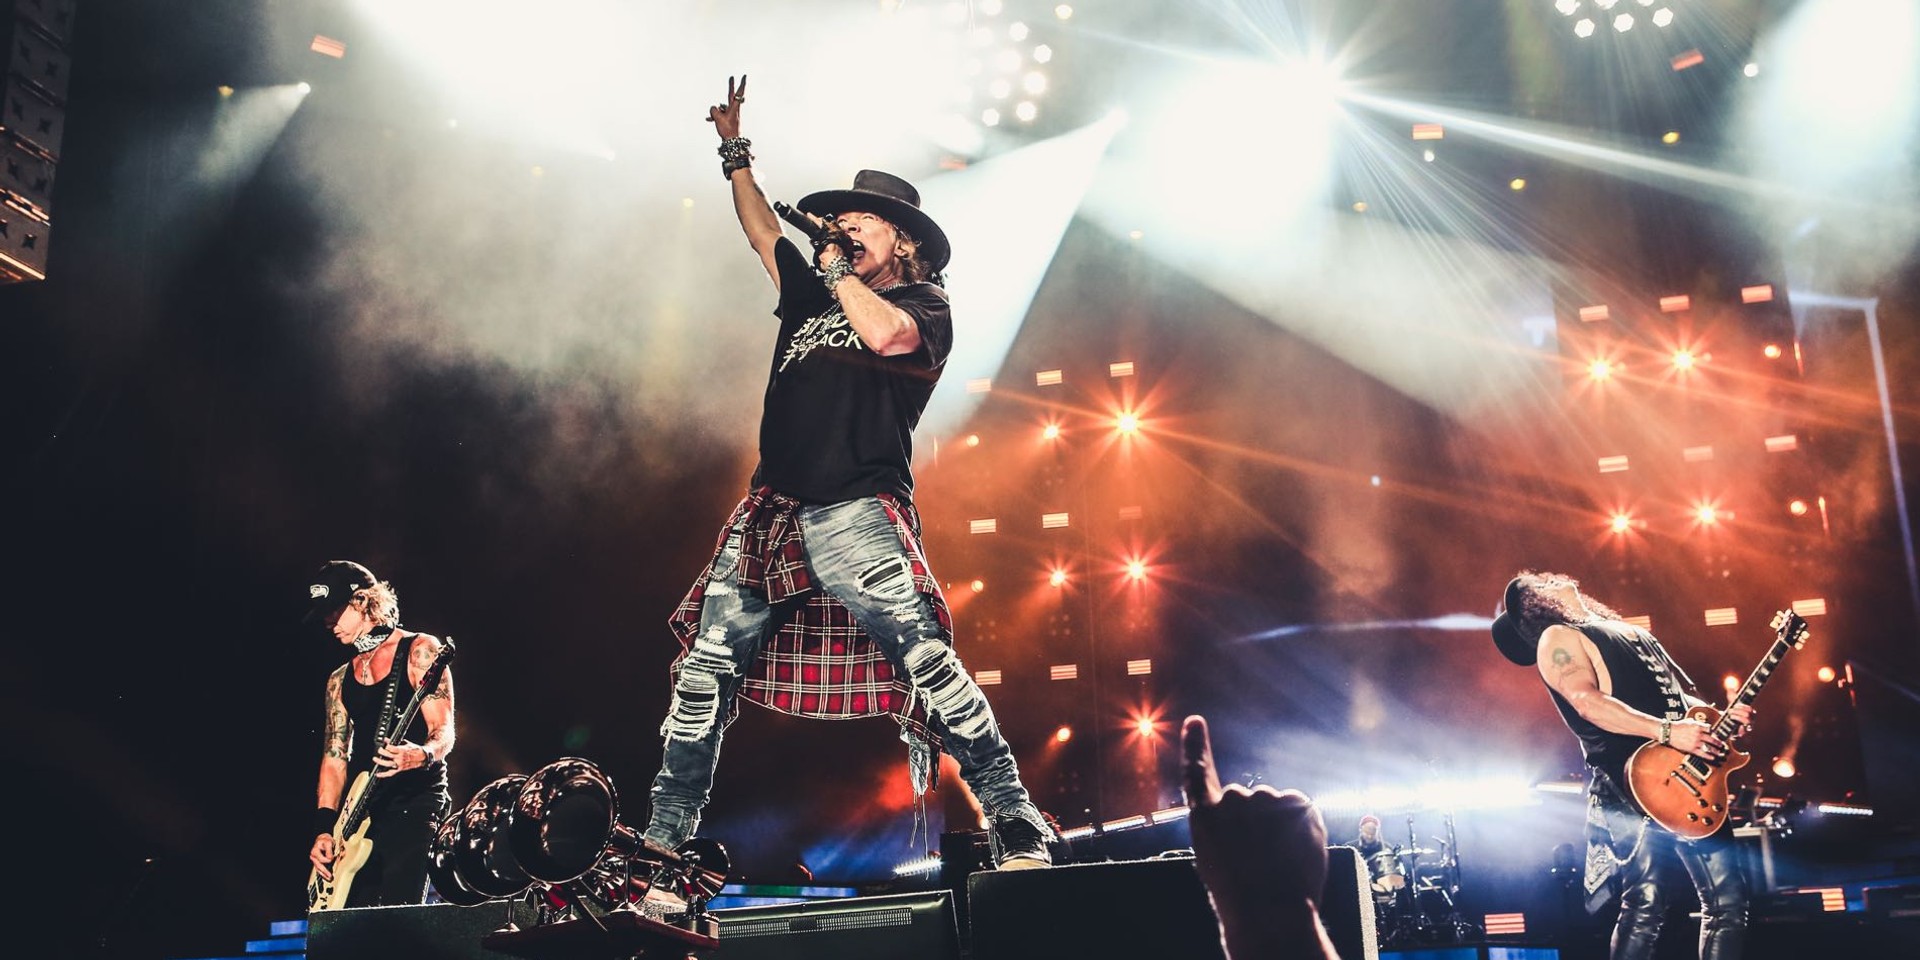 LAMC Productions’ Ross Knudson breaks down what went wrong at Guns N’ Roses' show in Singapore